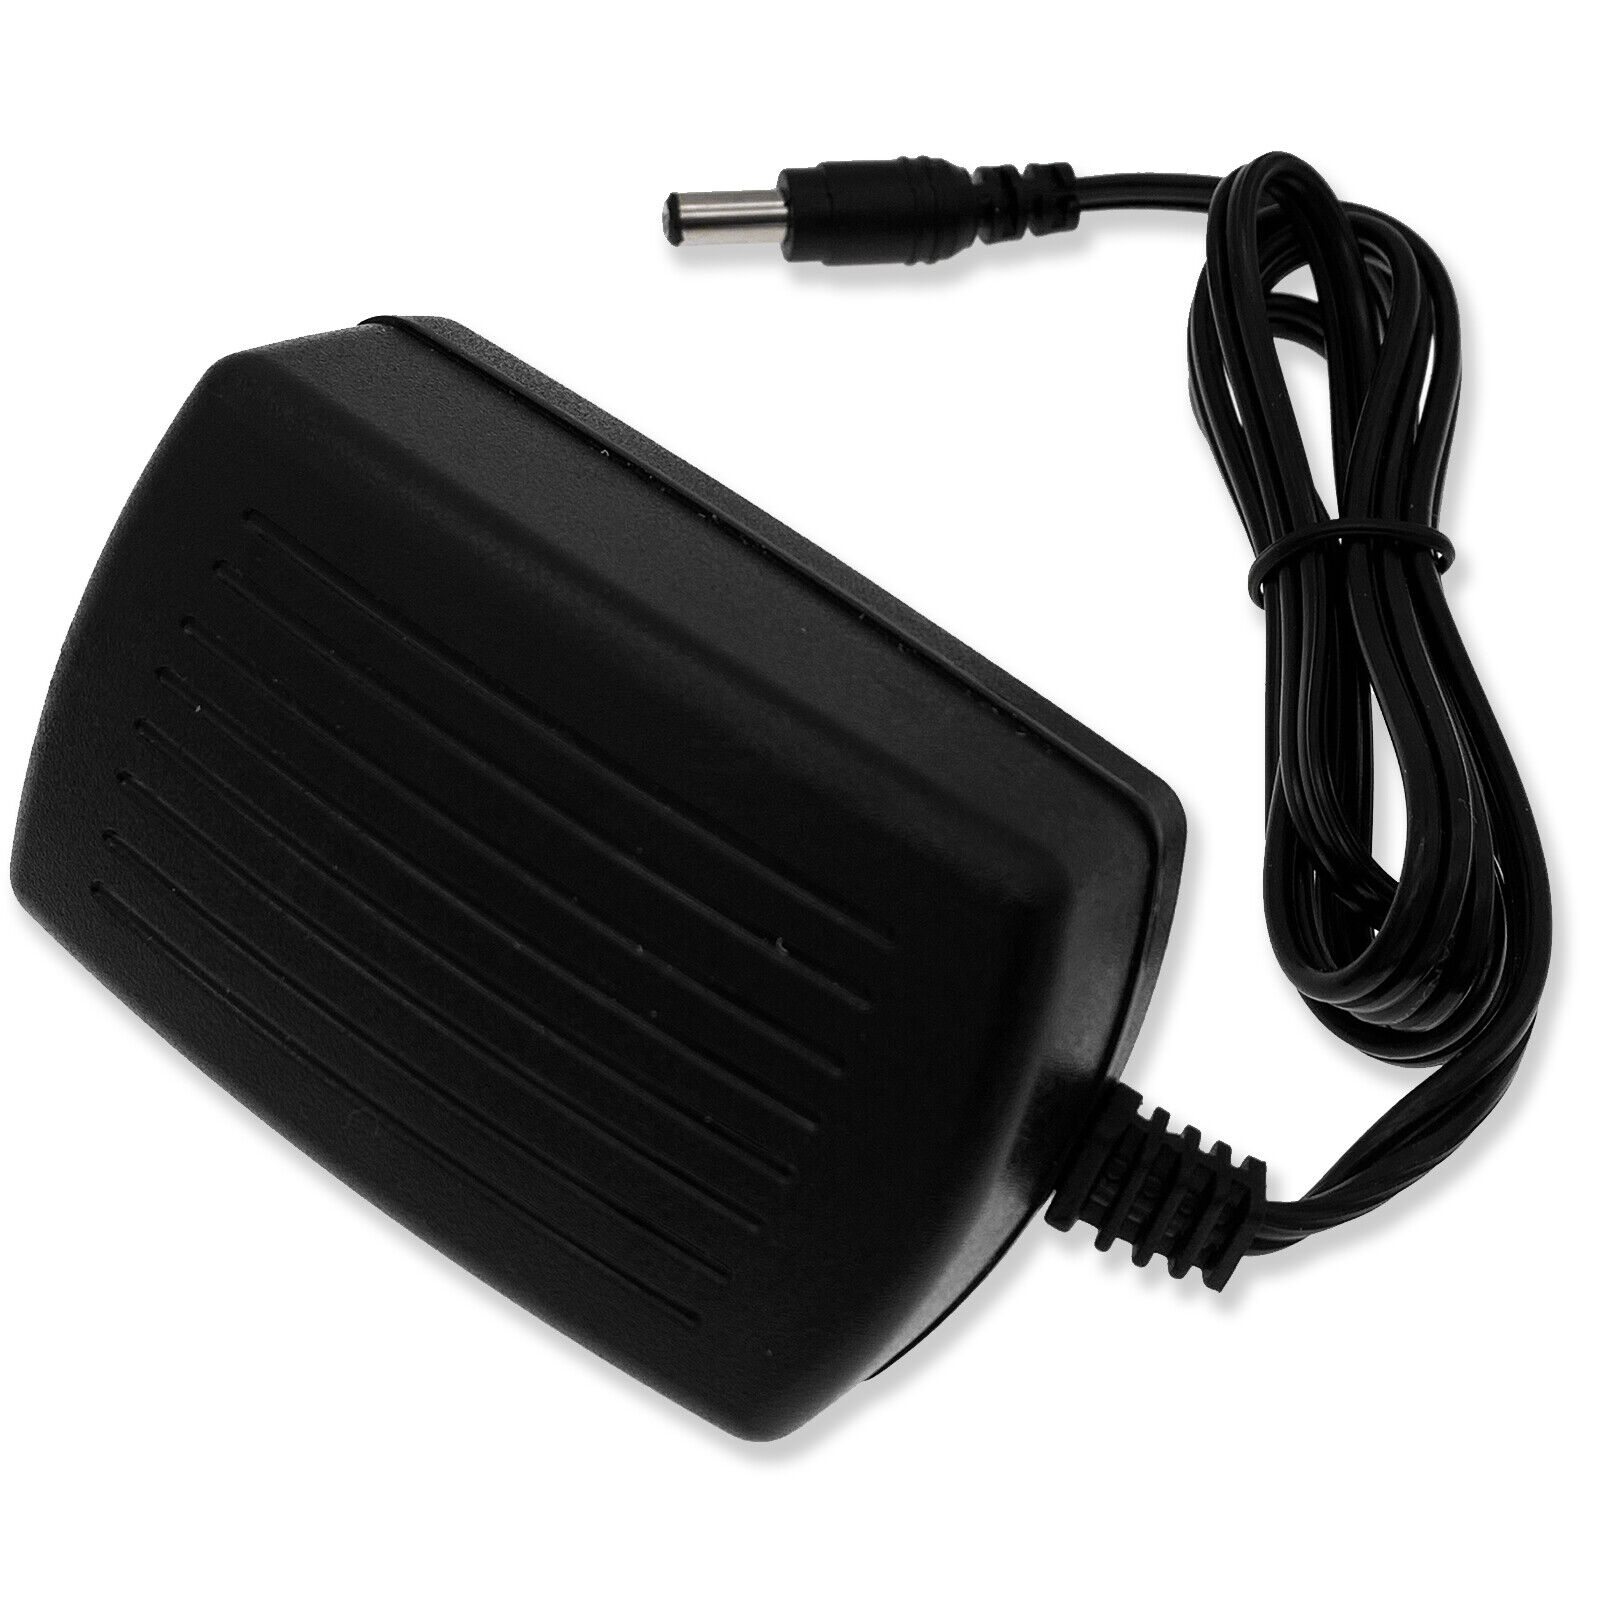 AC Power supply 24V adapter for Philips Wake-up light Alarm HF3500 HF3520 HF3550 Country/Region of Manufacture China Ty